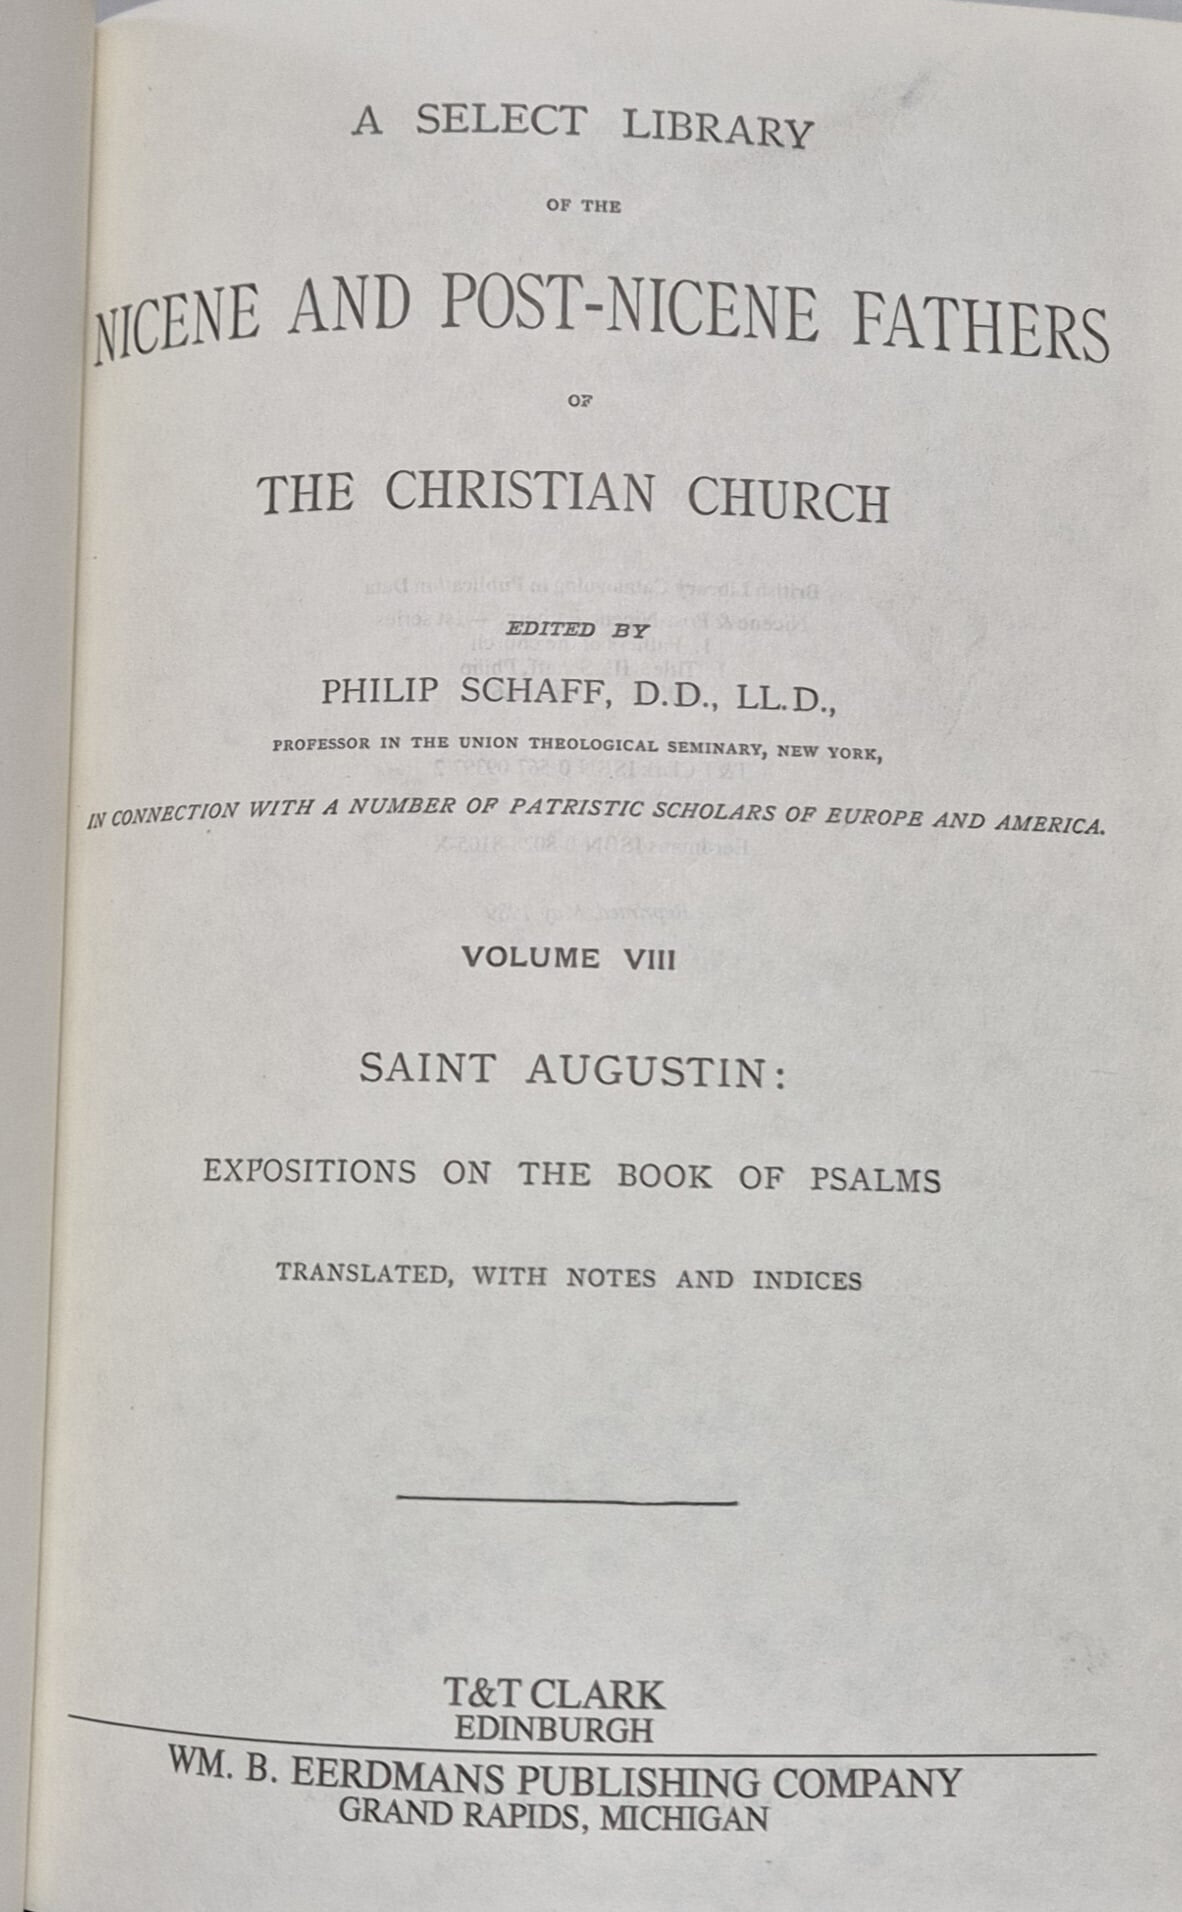 Nicene and Post-Nicene Fathers of the Christian Church - Vol.VIII  Saint Augustine: Expositions on the Psalms(First Series)